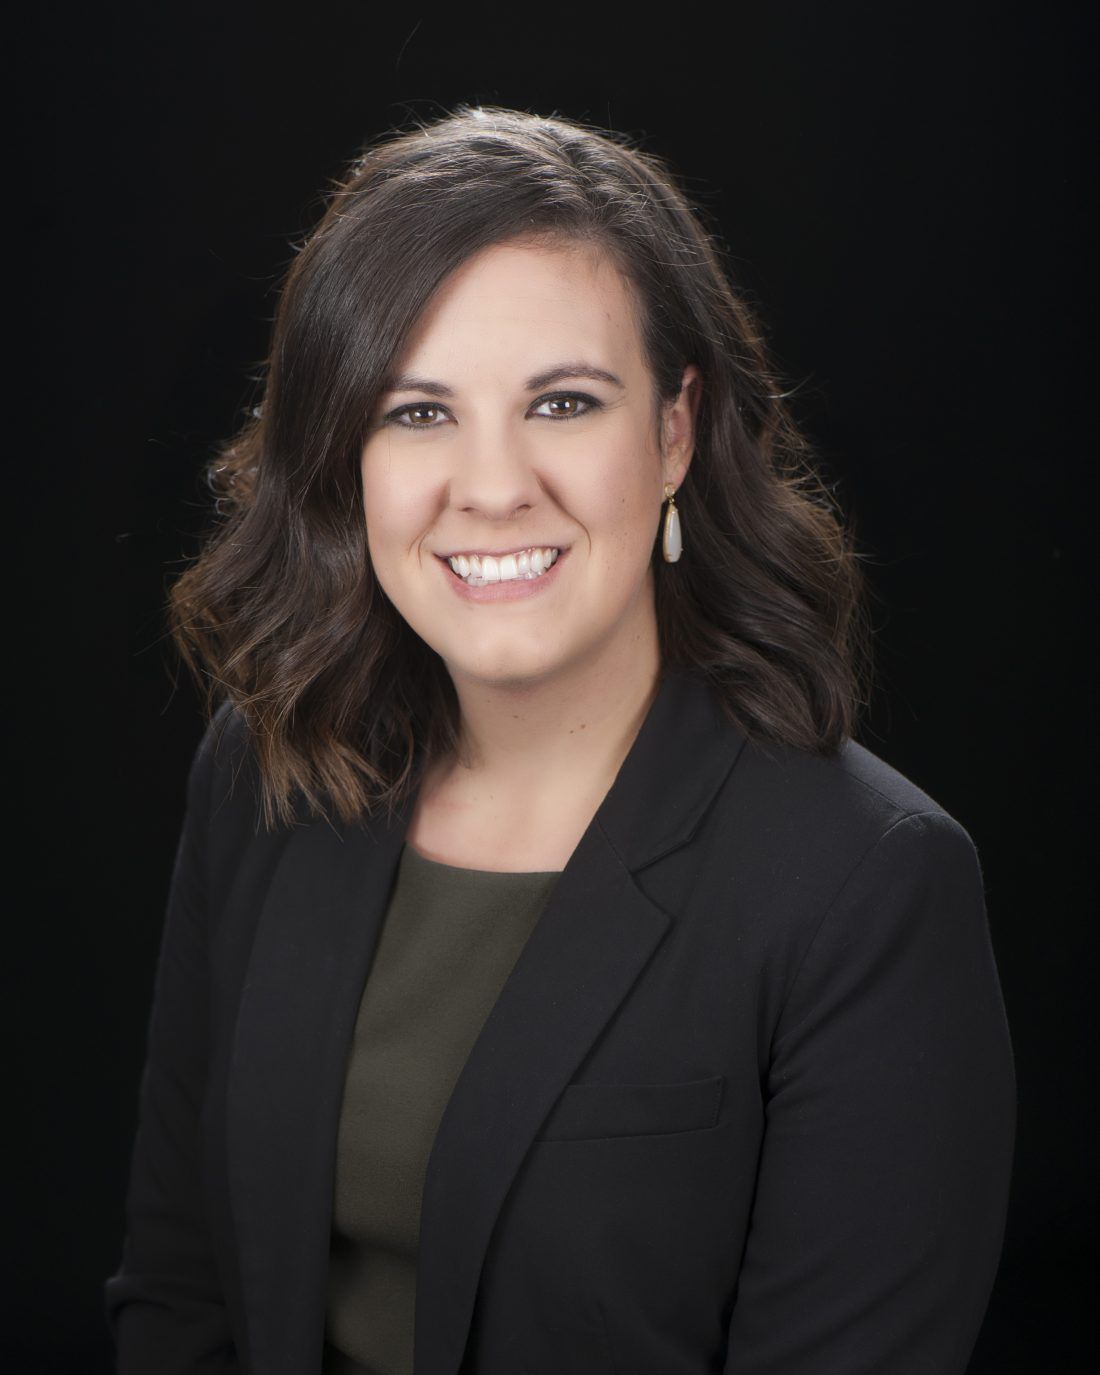 EdCounsel | Rachel Meystedt is an Attorney at EdCounsel.